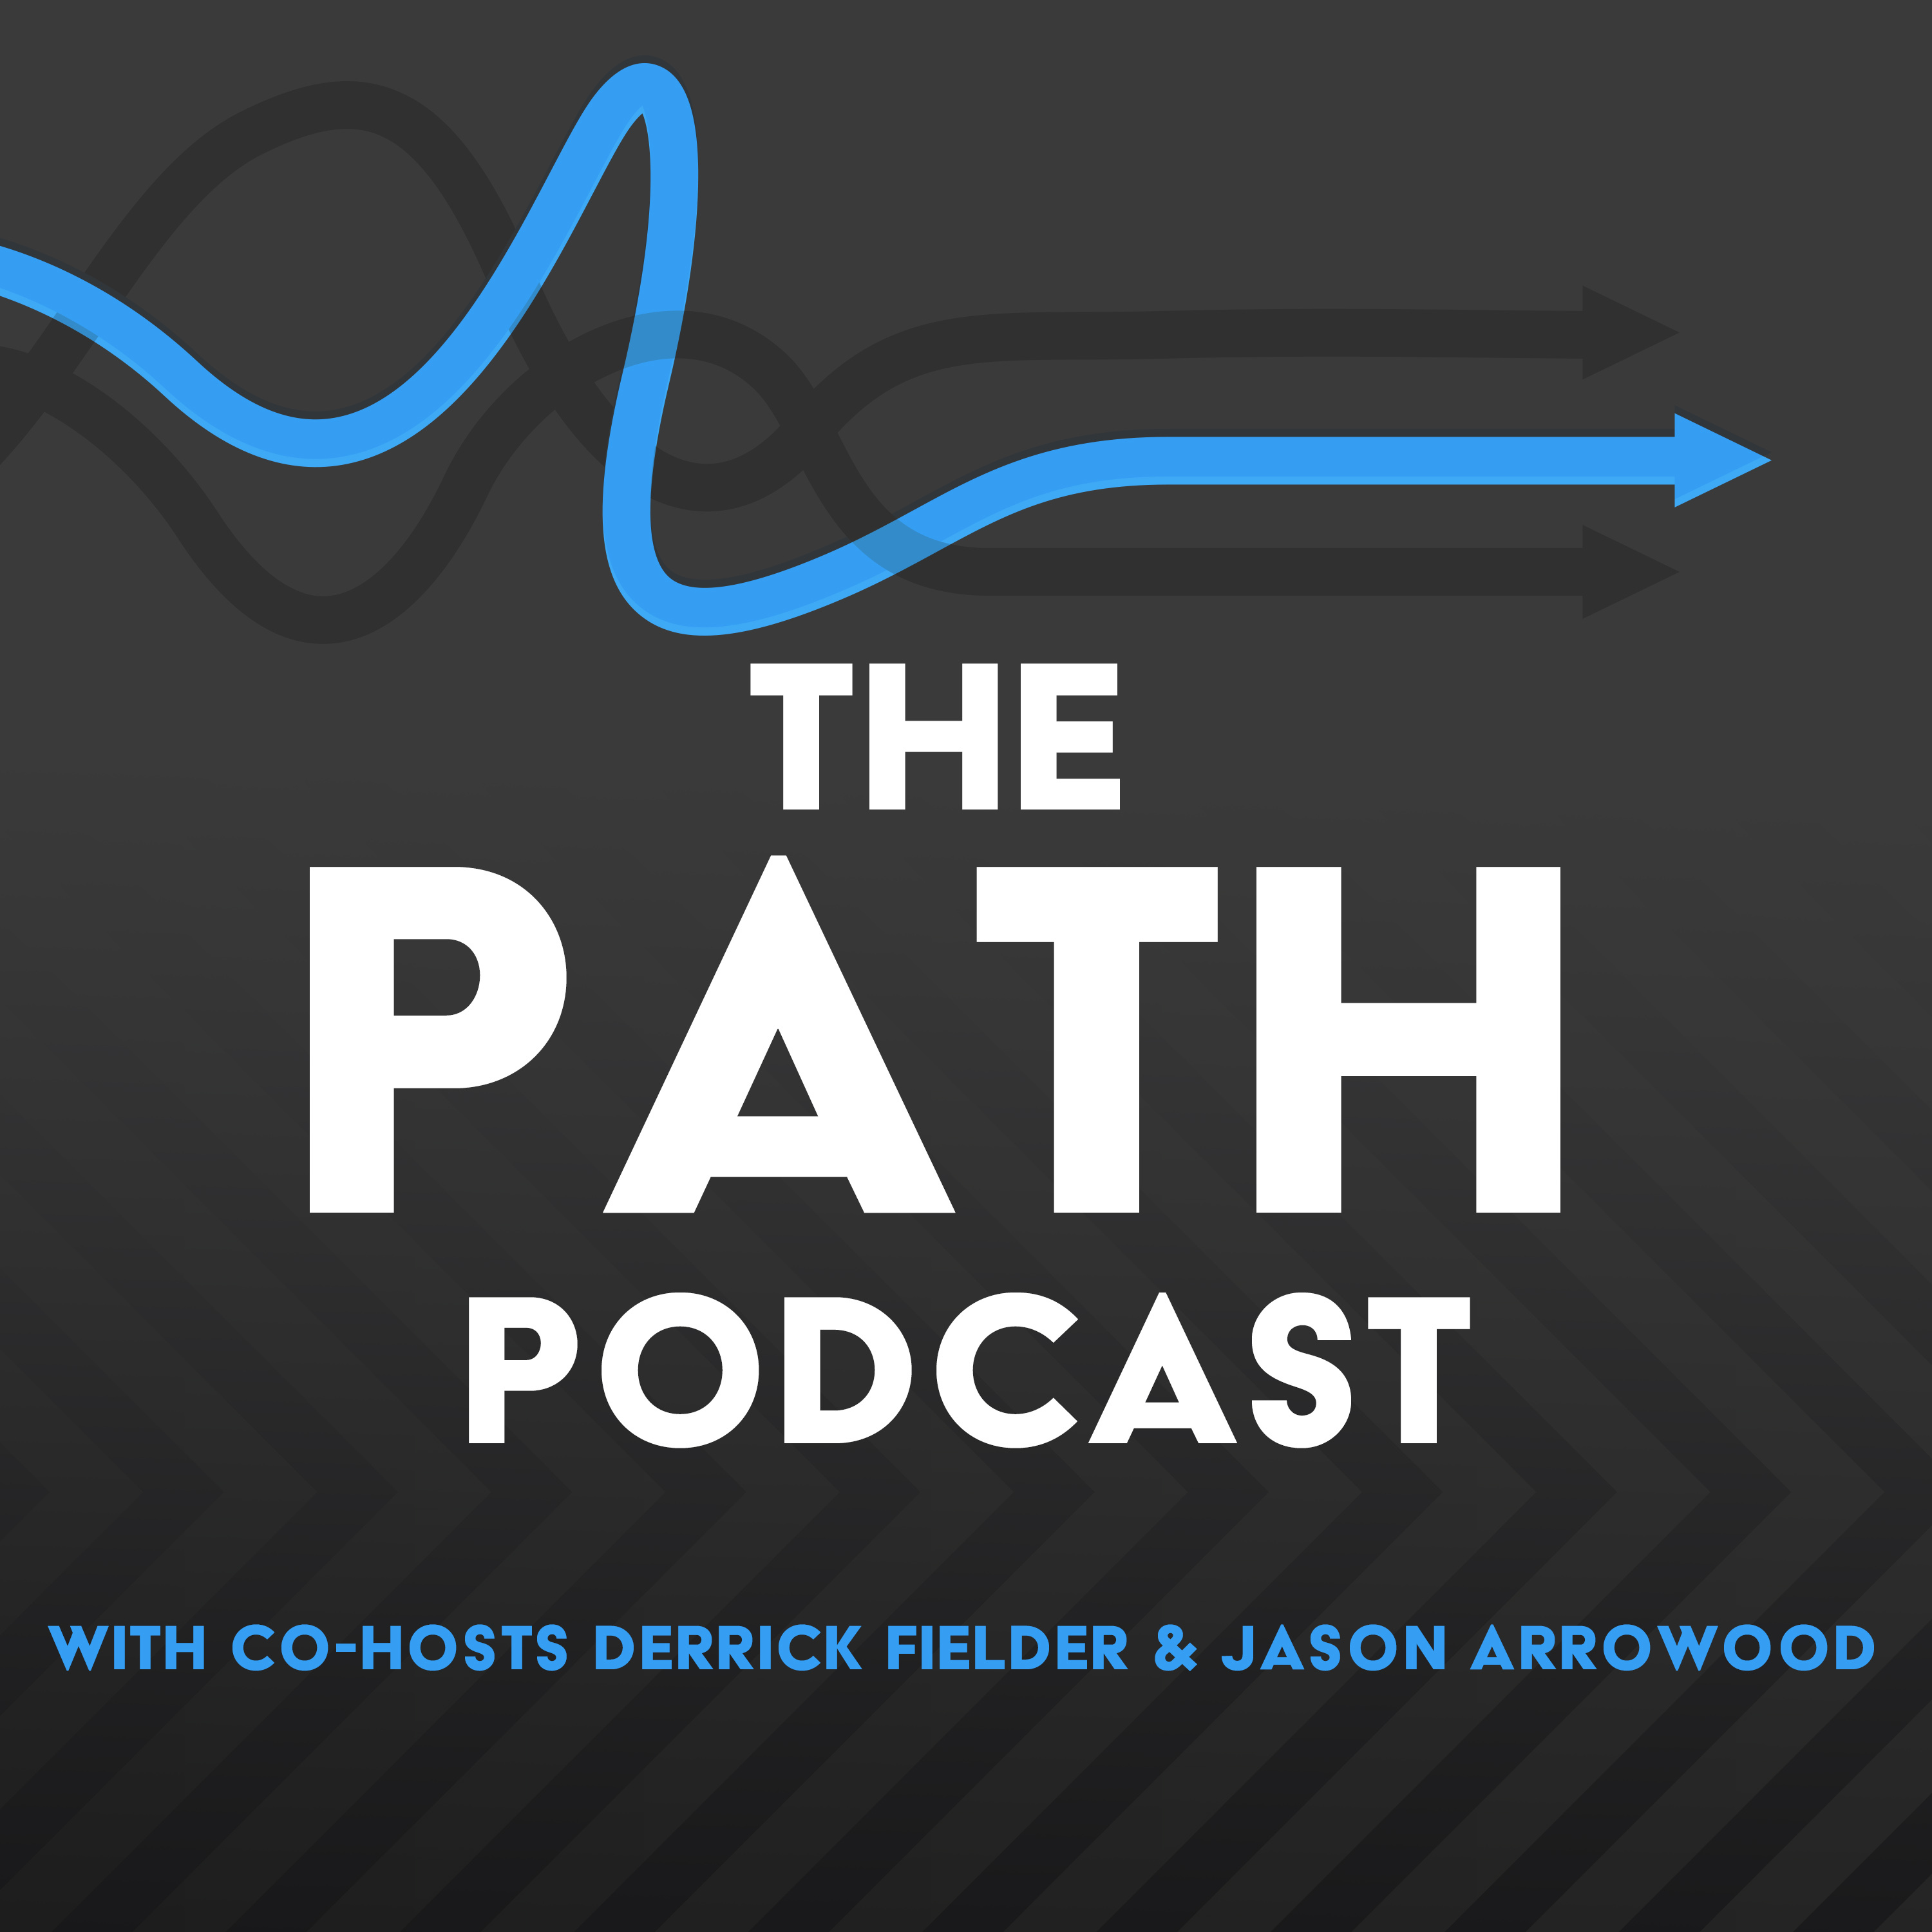 The Path Podcast